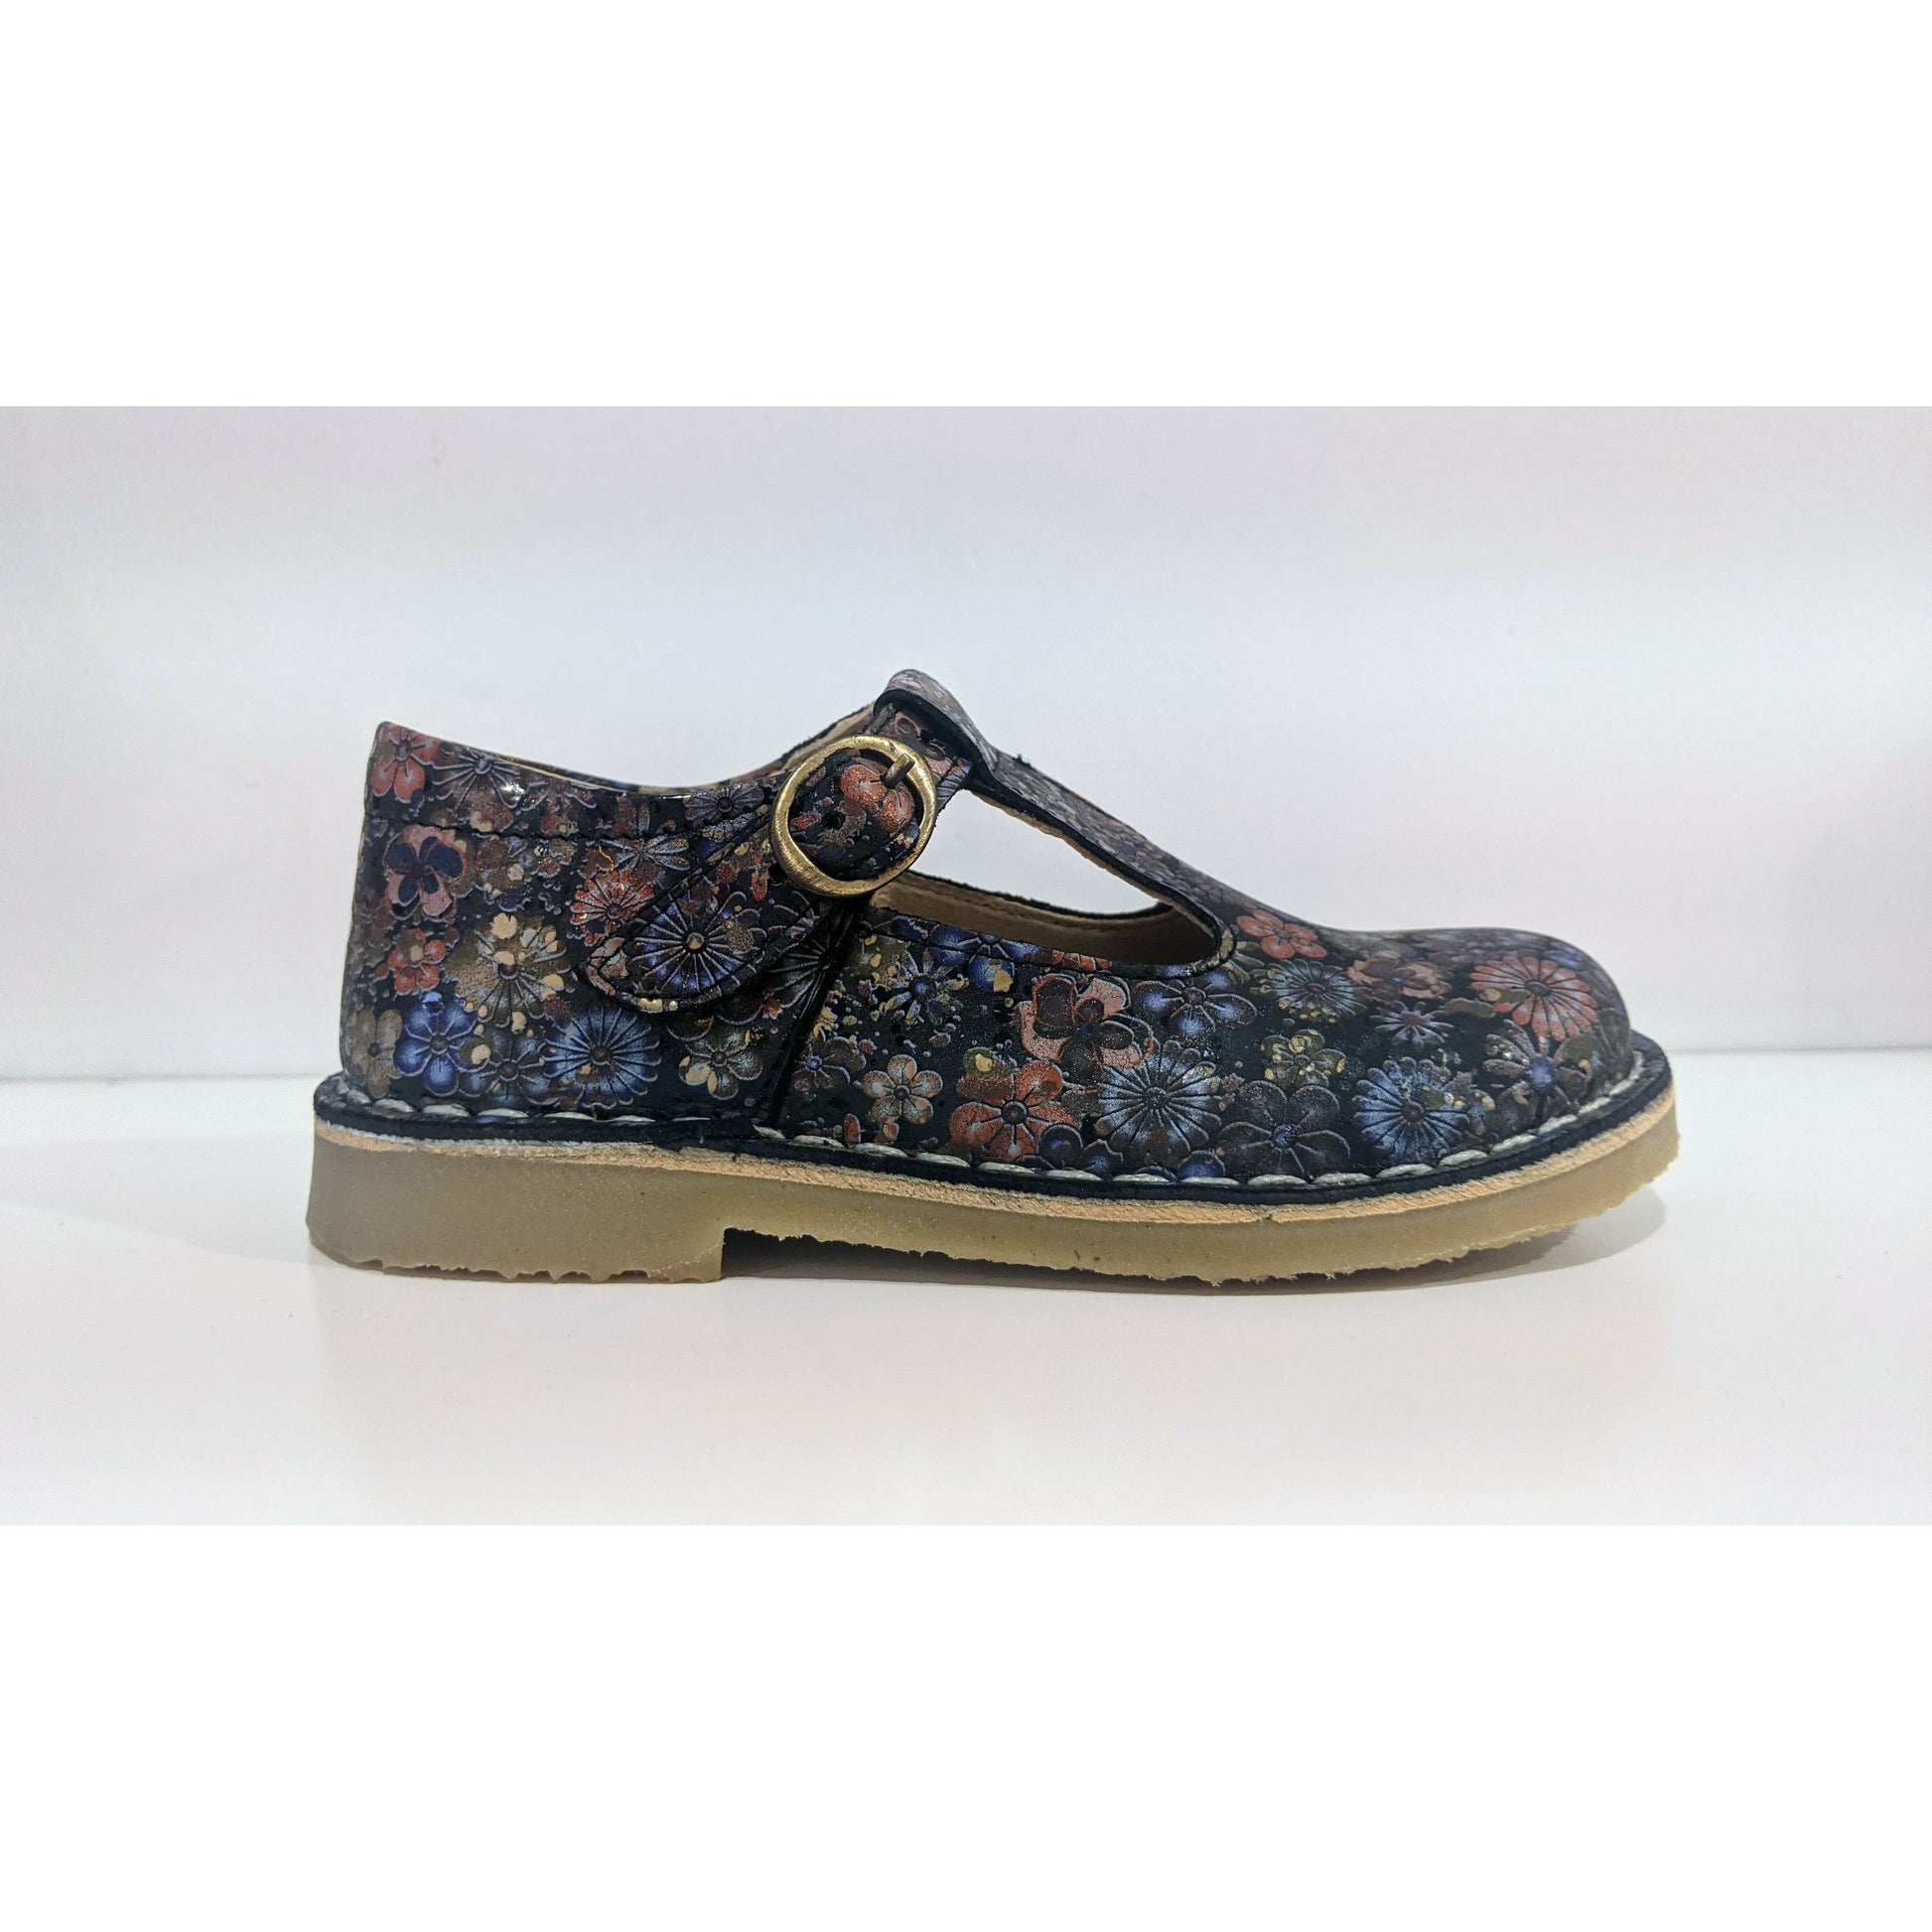 A girls T-Bar shoe by Petasil,style Crosspatch, in bronze floral leather with buckle fastening. Right side view.